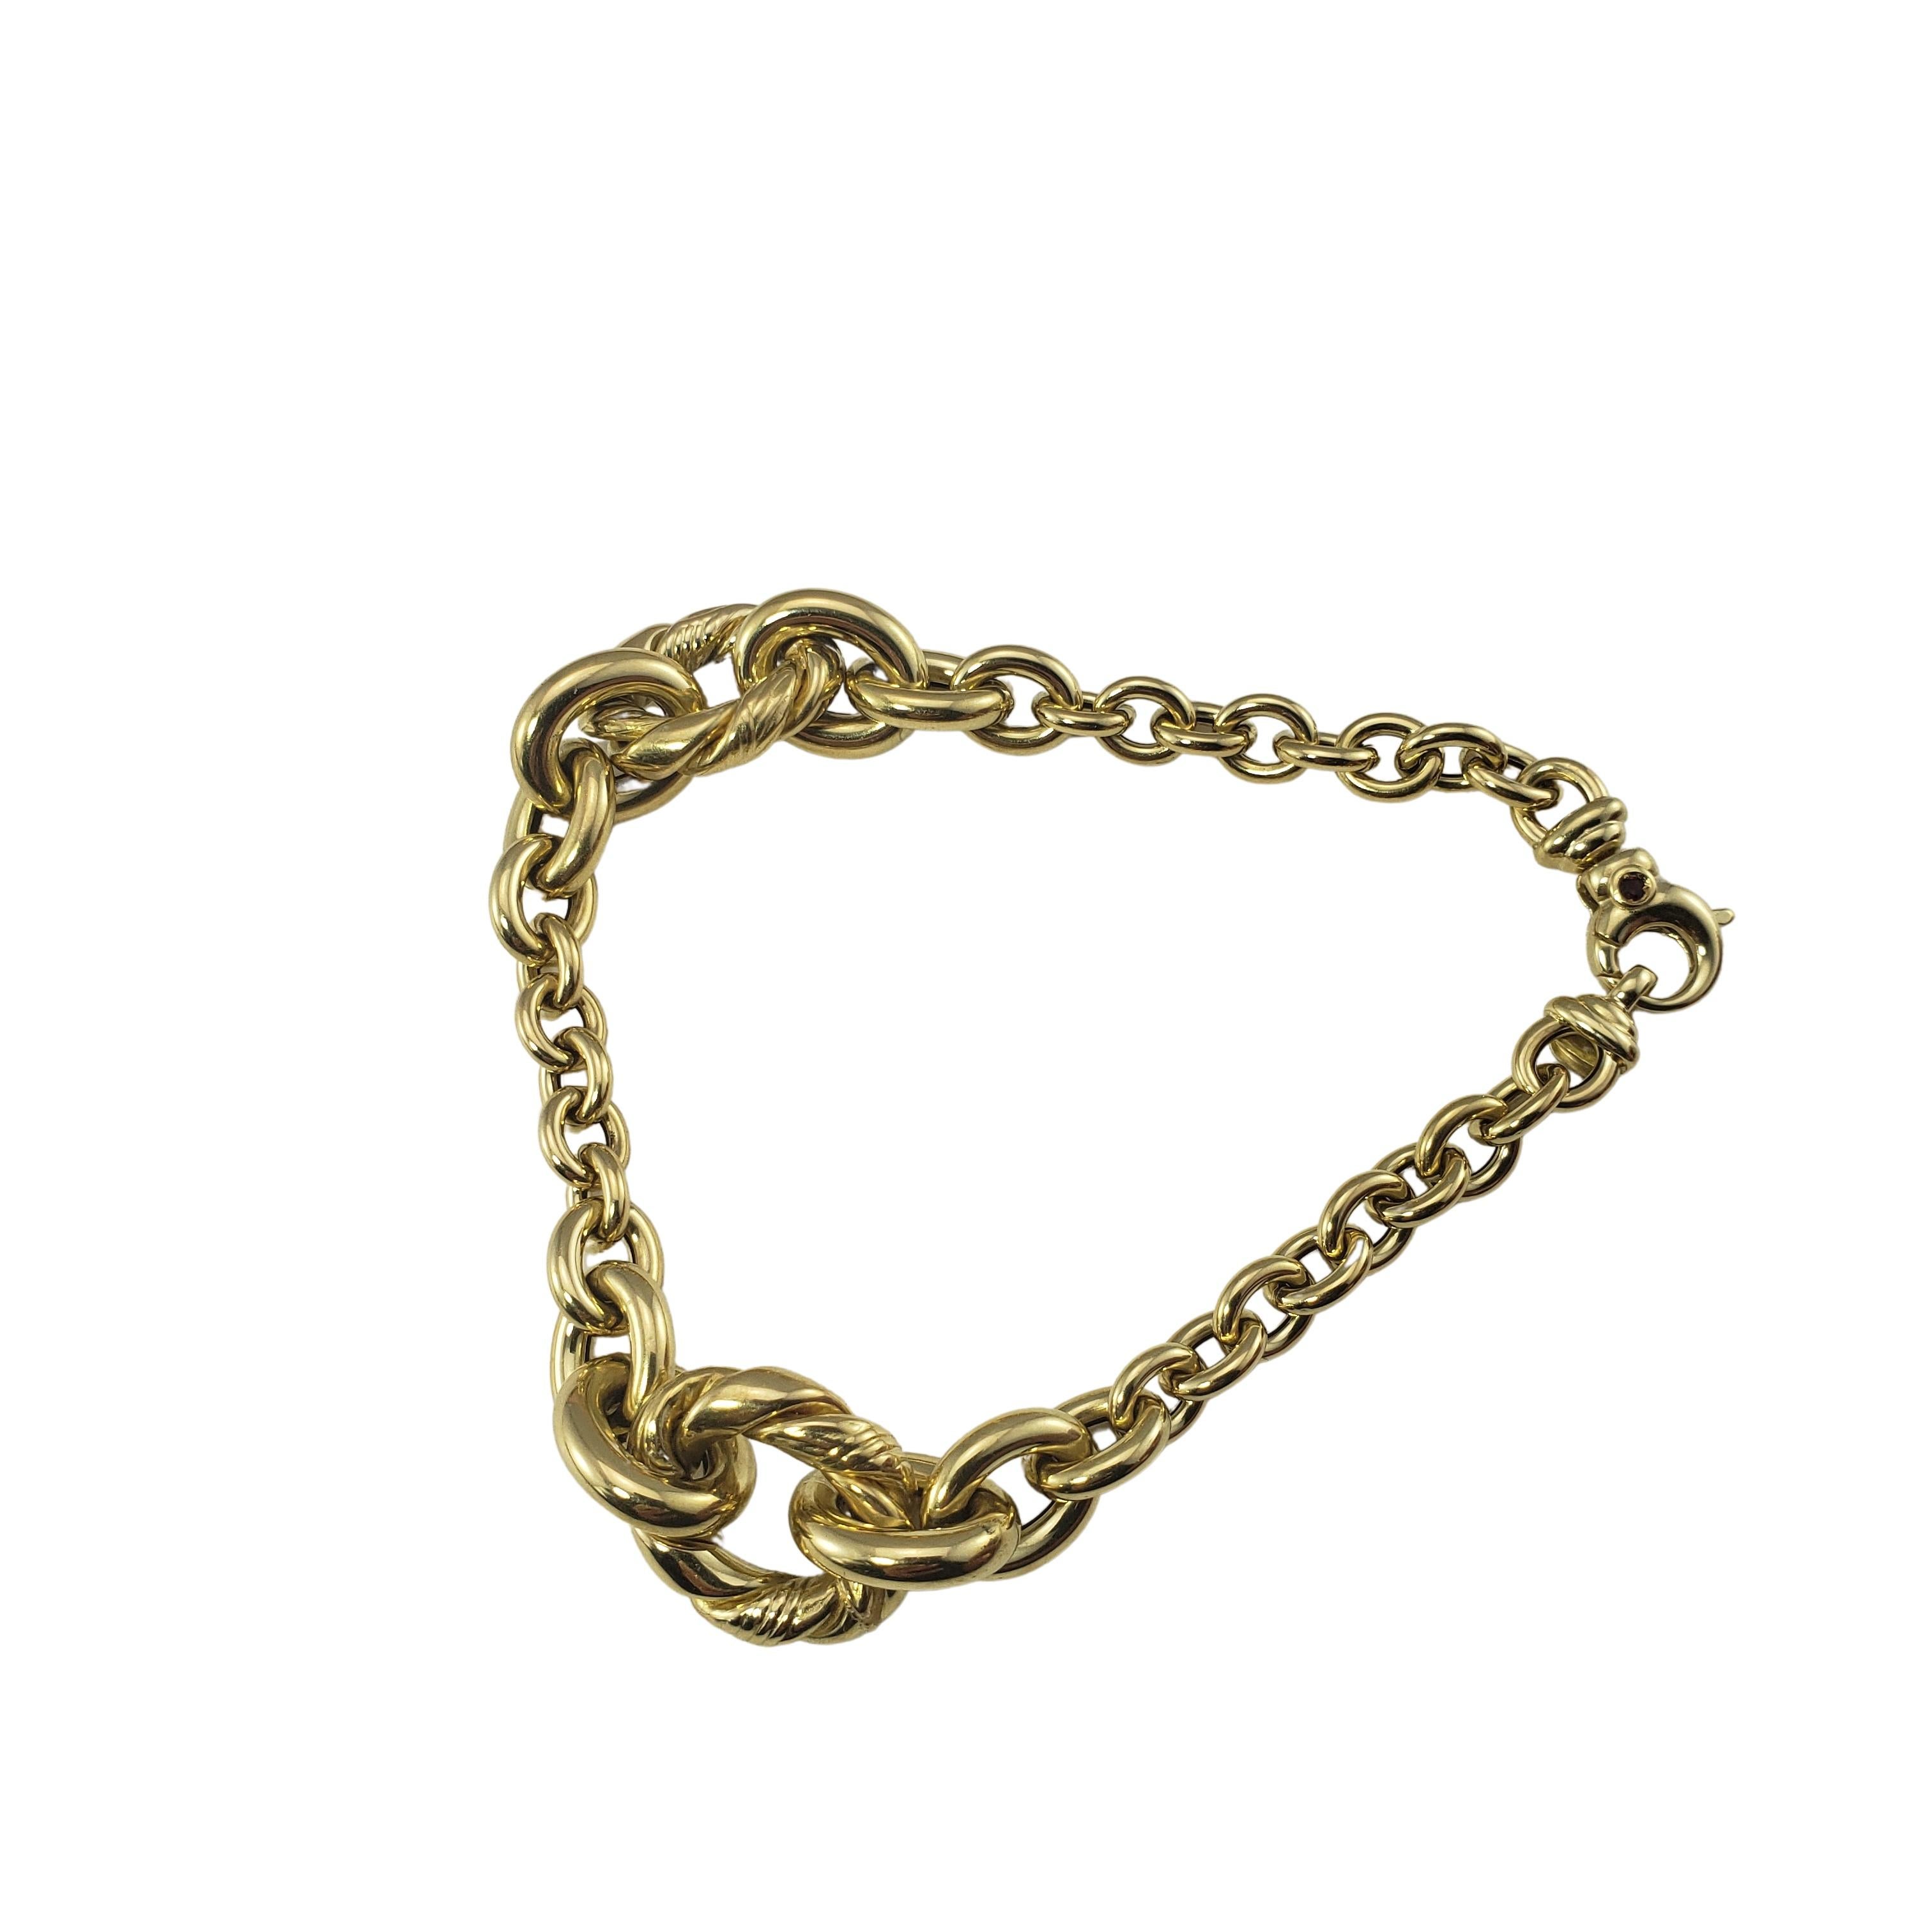 Roberto Coin 18 Karat Yellow Gold Link Bracelet-

This elegant link bracelet by Roberto Coin is crafted in beautifully detailed 18K yellow gold.  Accented with signature Roberto Coin ruby.  Width:  9 mm.

Size: 6.75 inches

Weight:  7.3 dwt. /  11.4